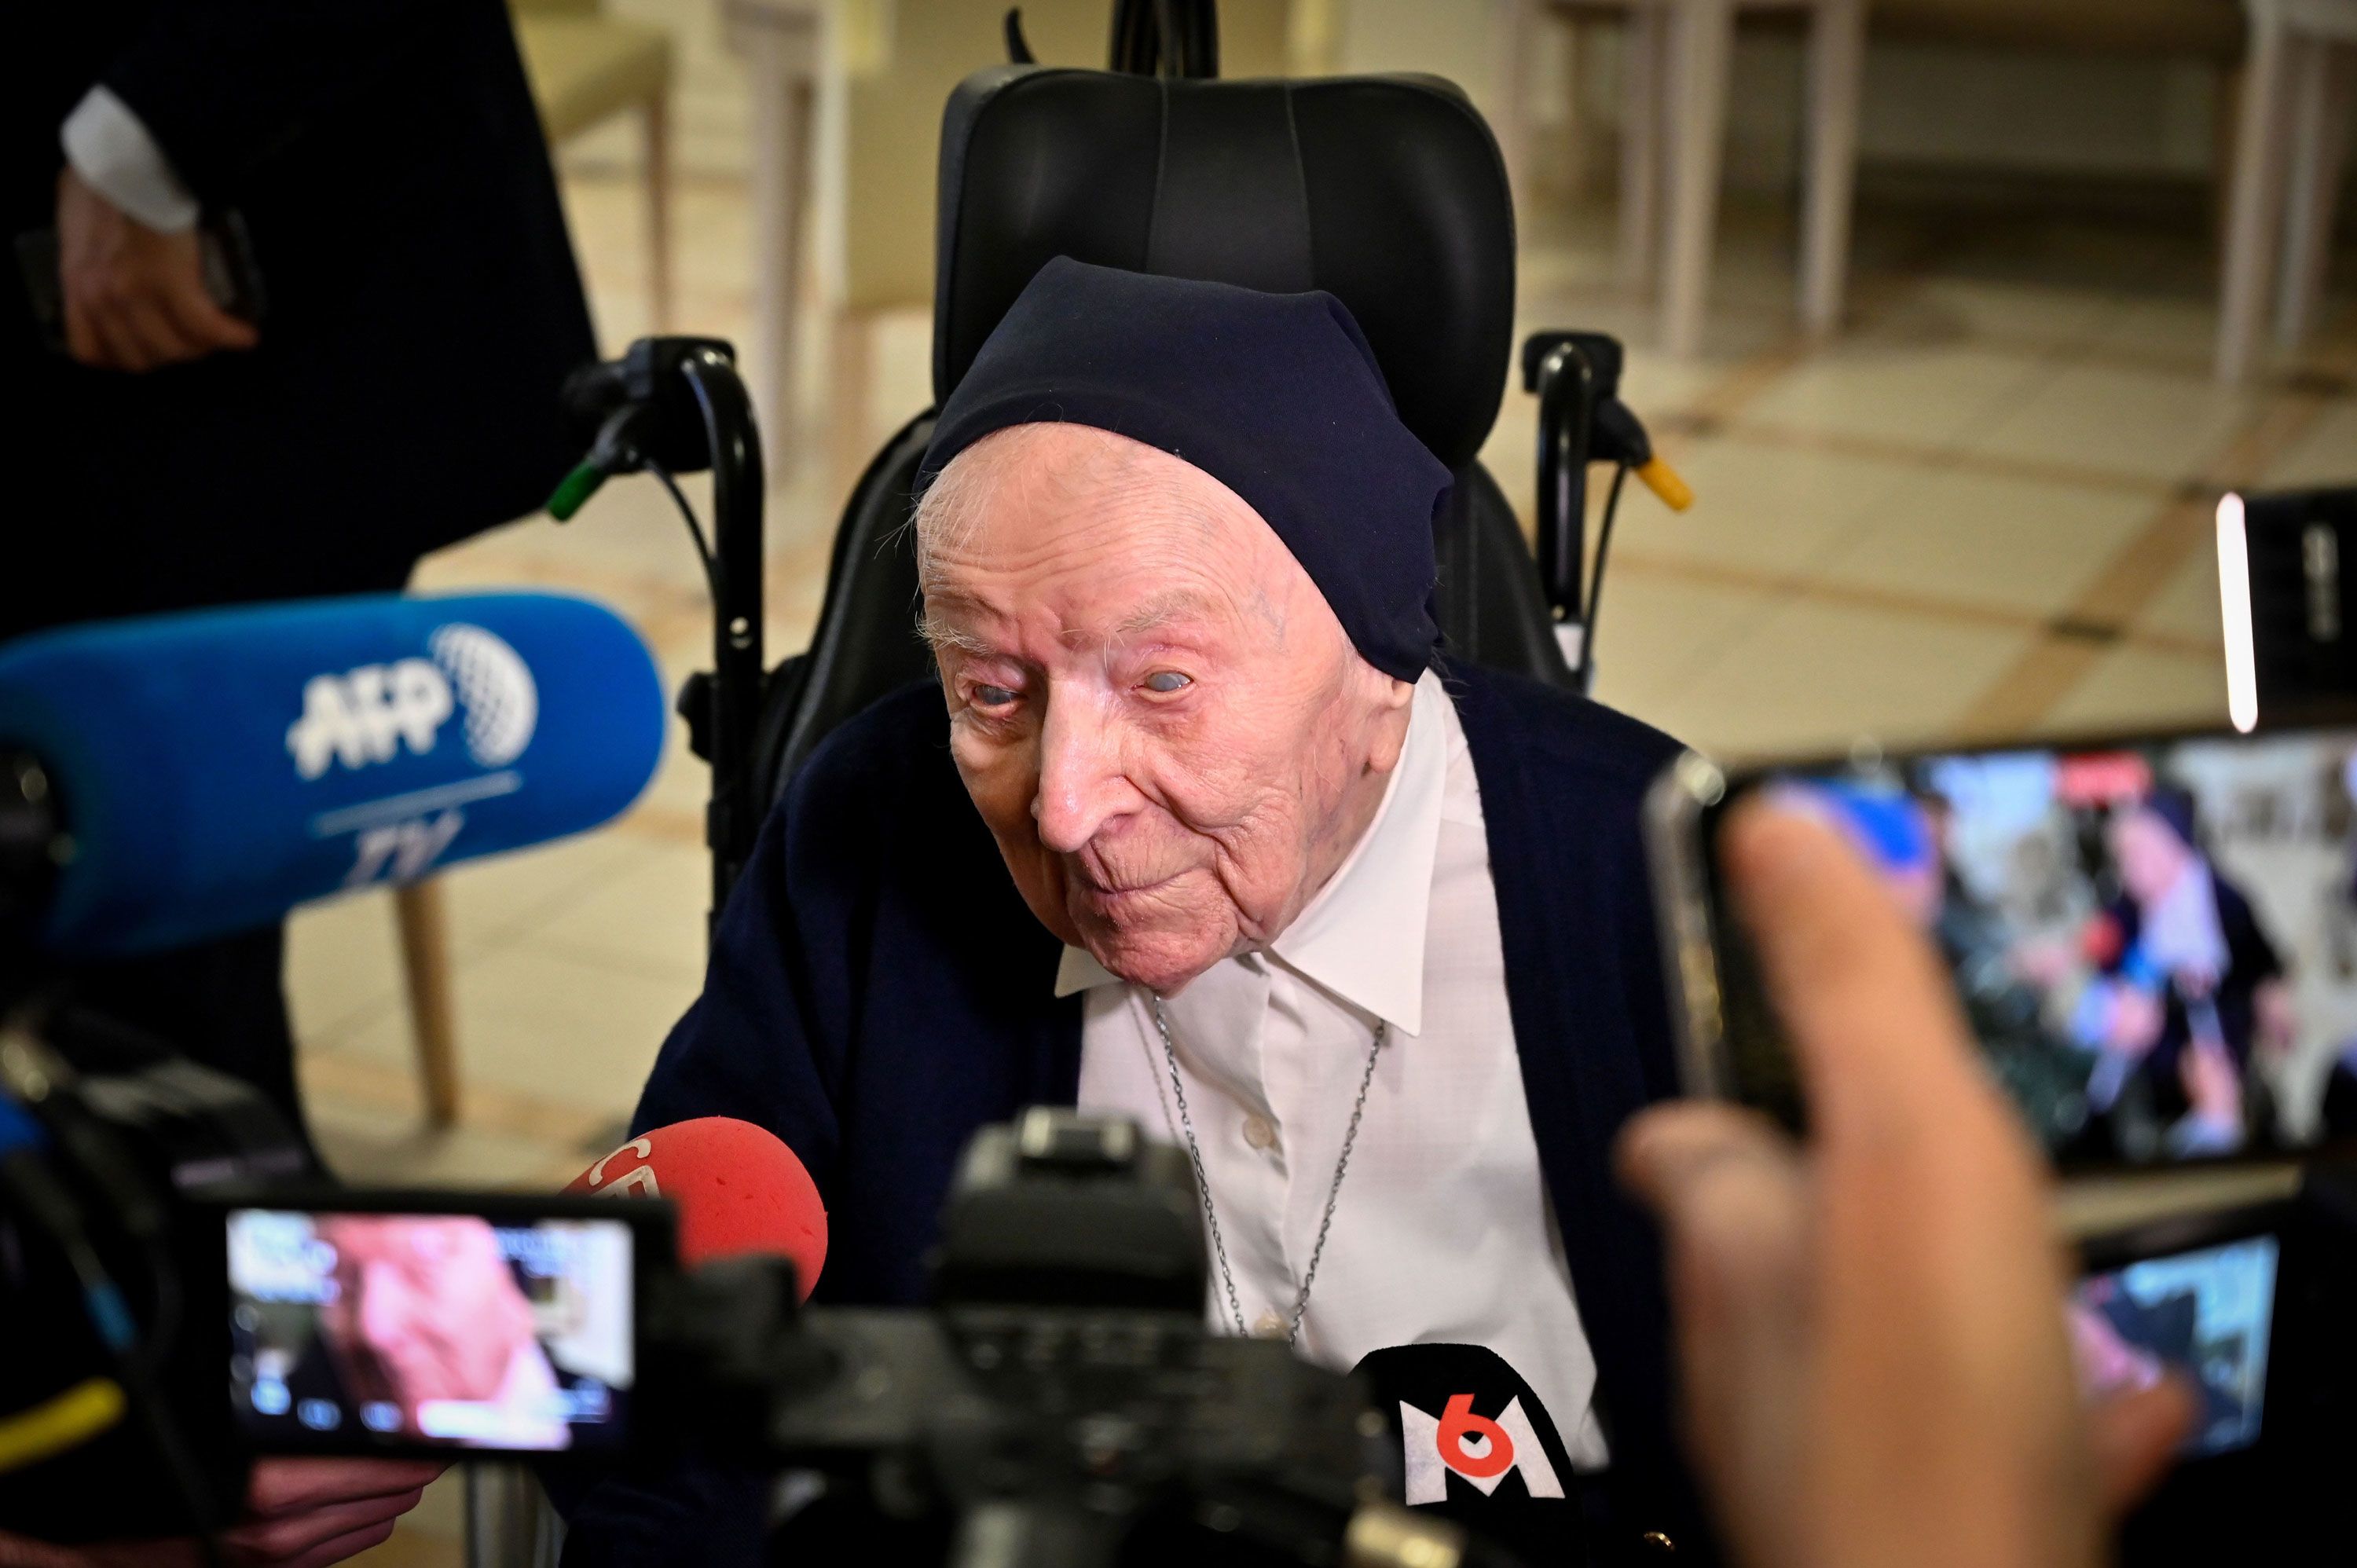 Europe's oldest person, a 116-year-old French nun, survives Covid-19 | CNN